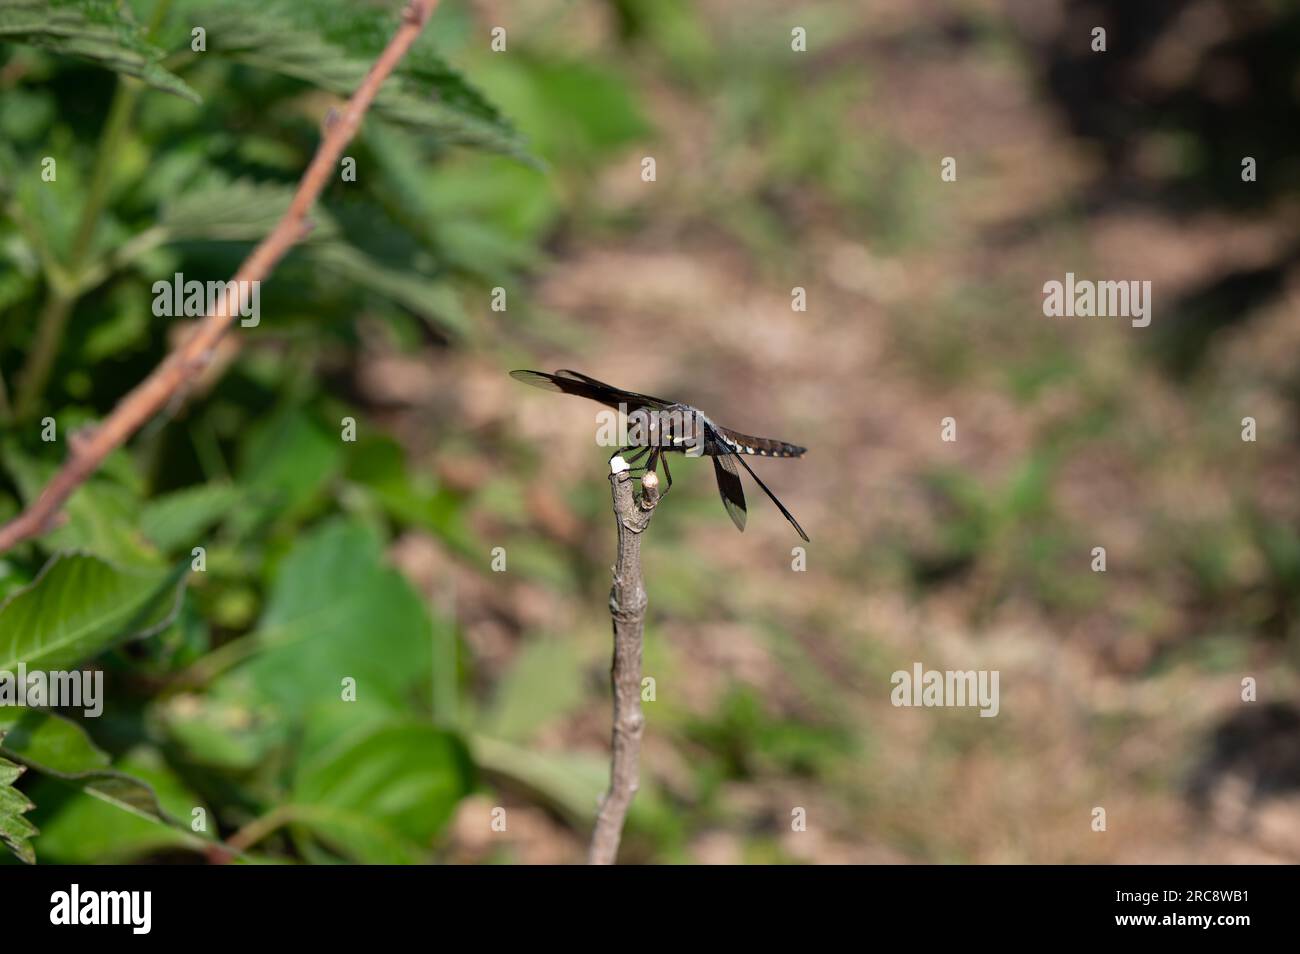 A maile juvenile Common Whitetail Dragonfly Plathemis lydia perched on a branch Stock Photo